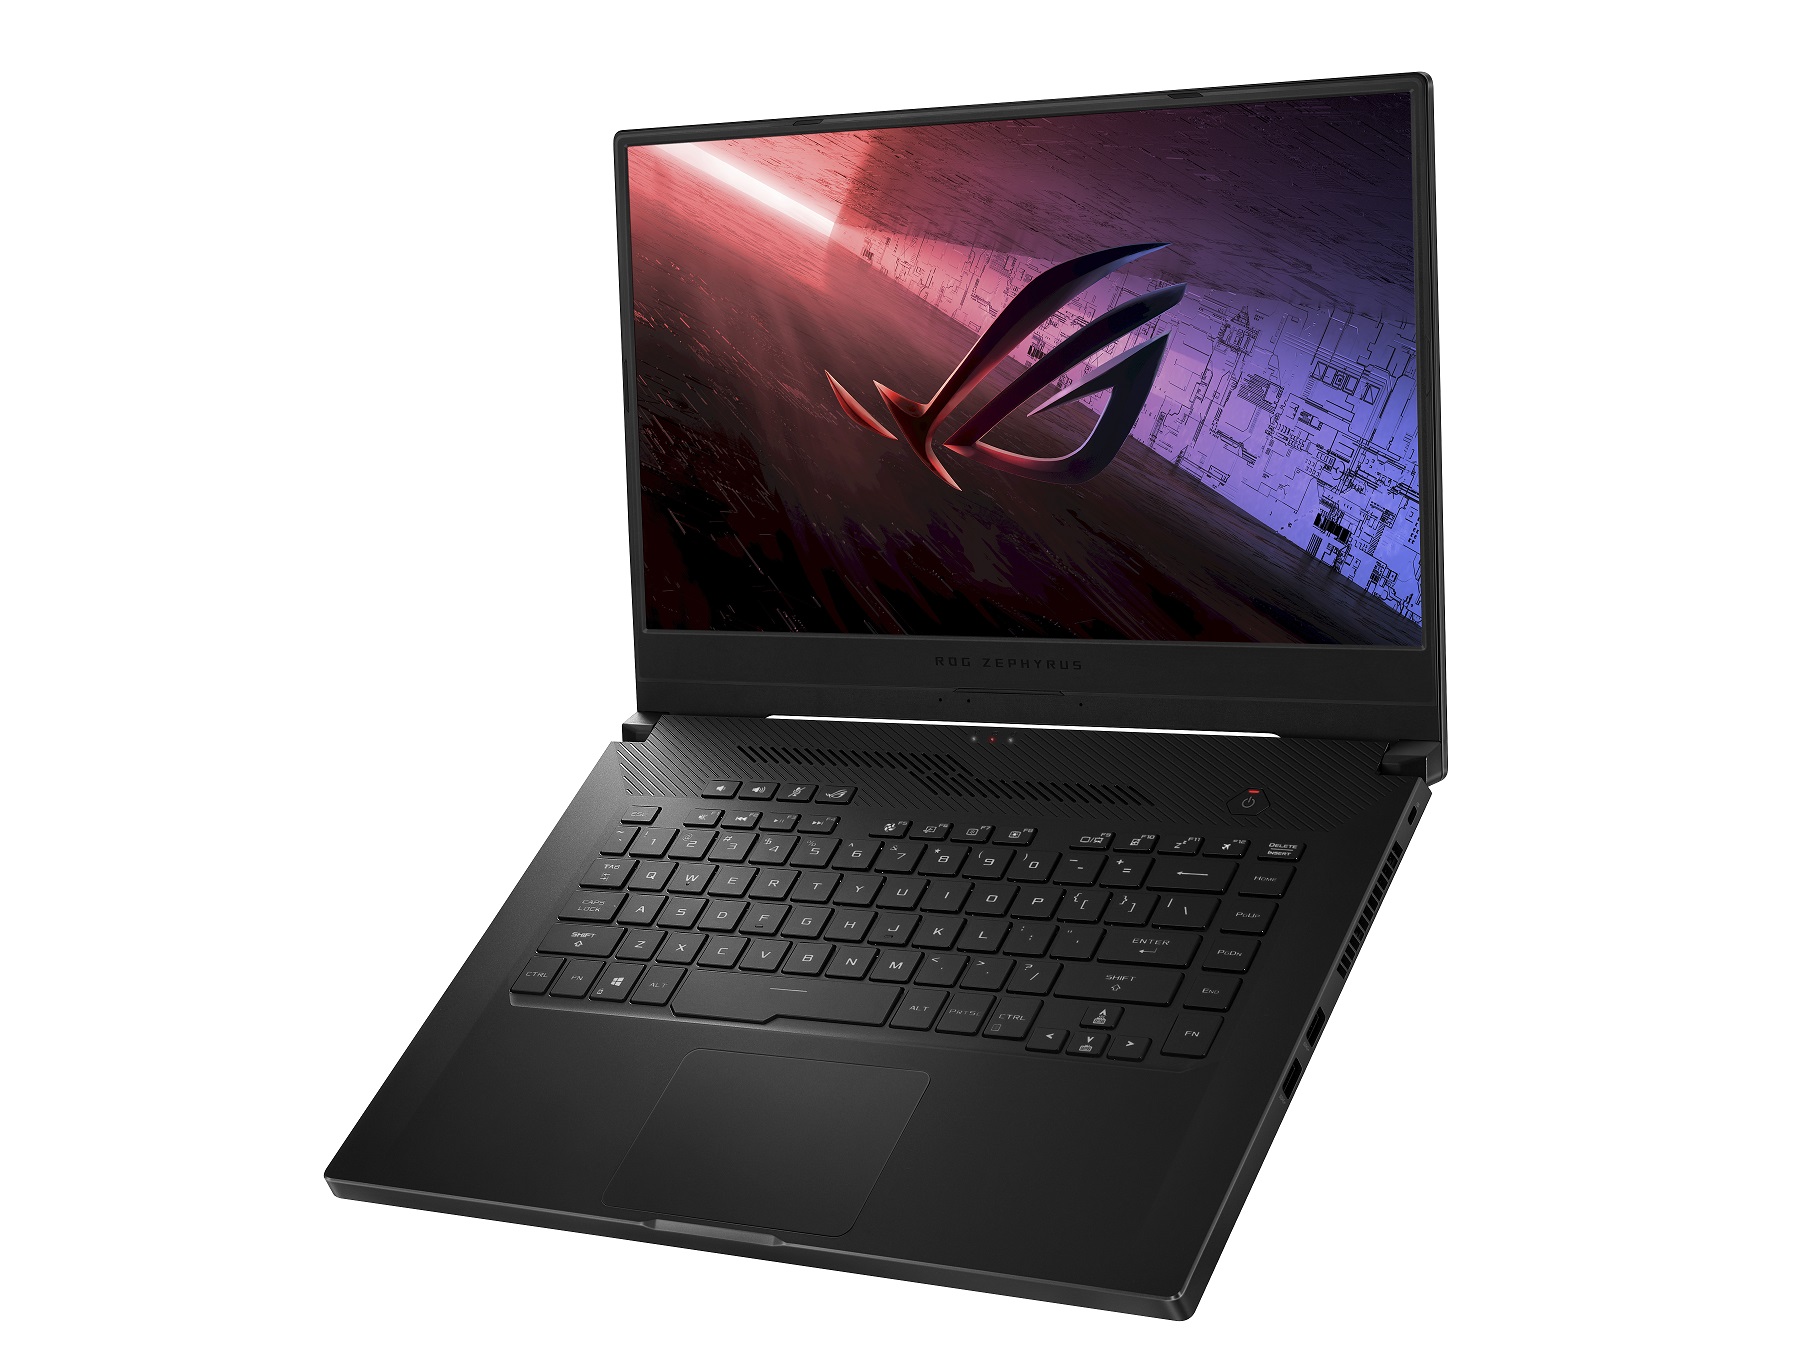 ASUS ROG Zephyrus G15 gets the AMD Ryzen 7 Treatment; Priced at RM